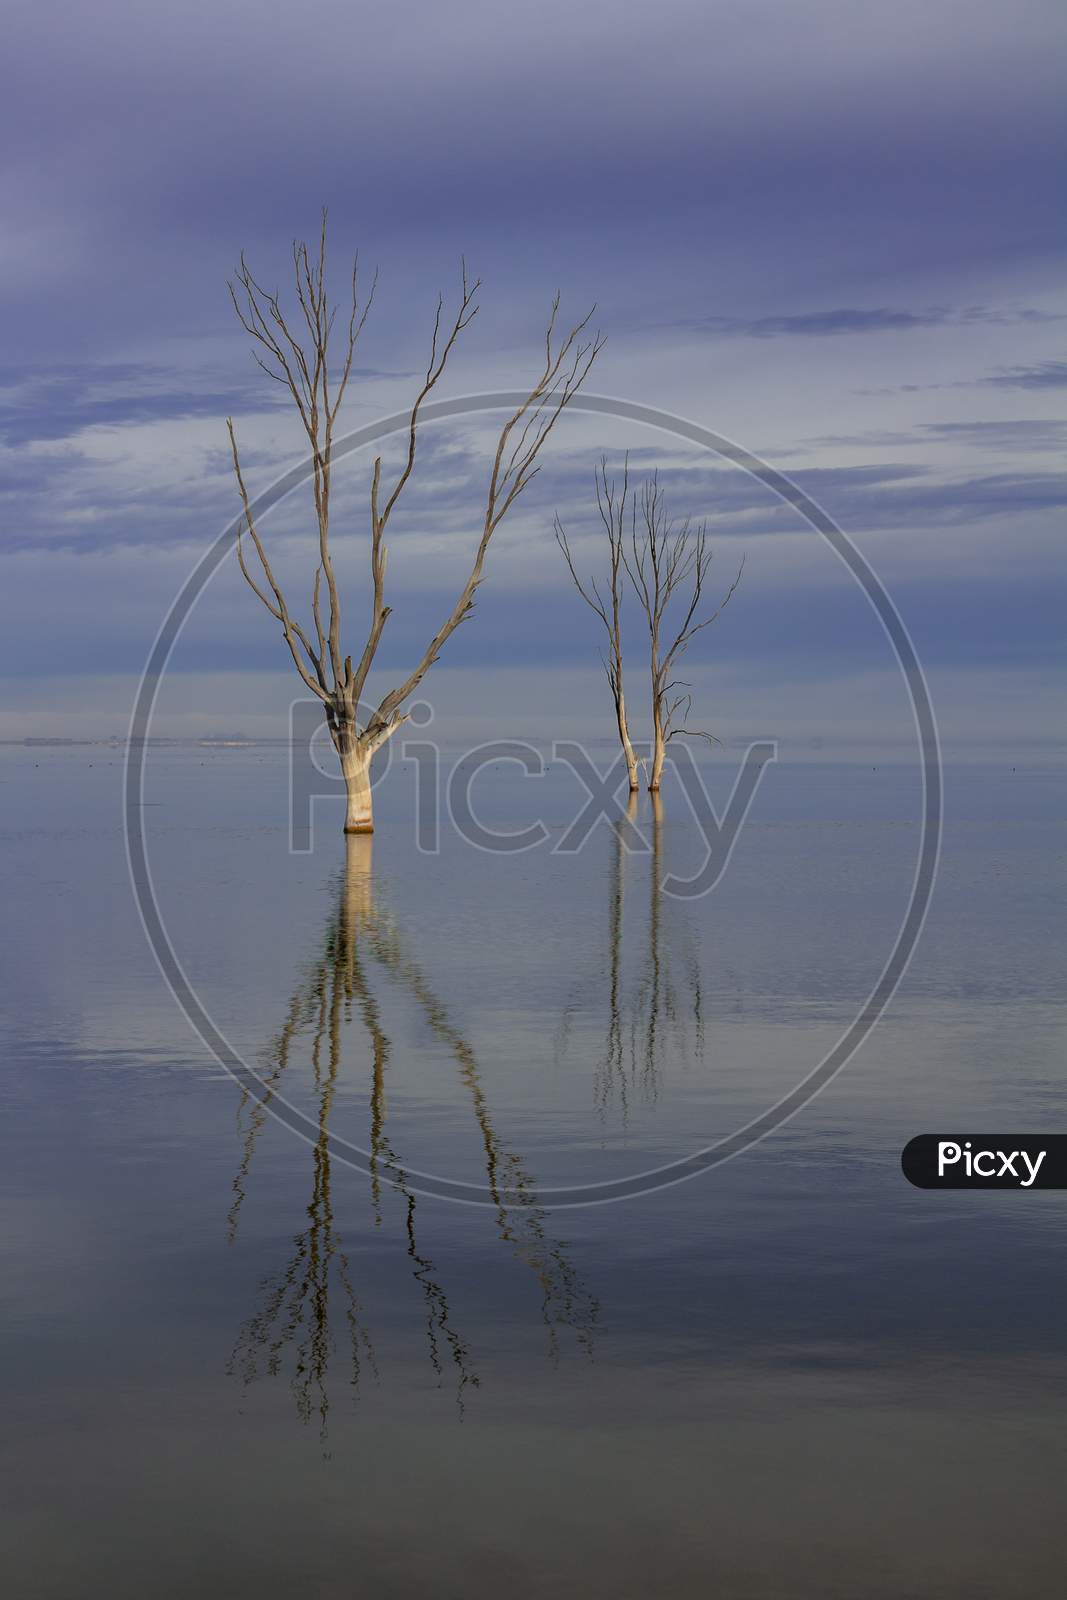 Dry Tree In The Lake. The Mist And The Clouds Melt On The Horizon.